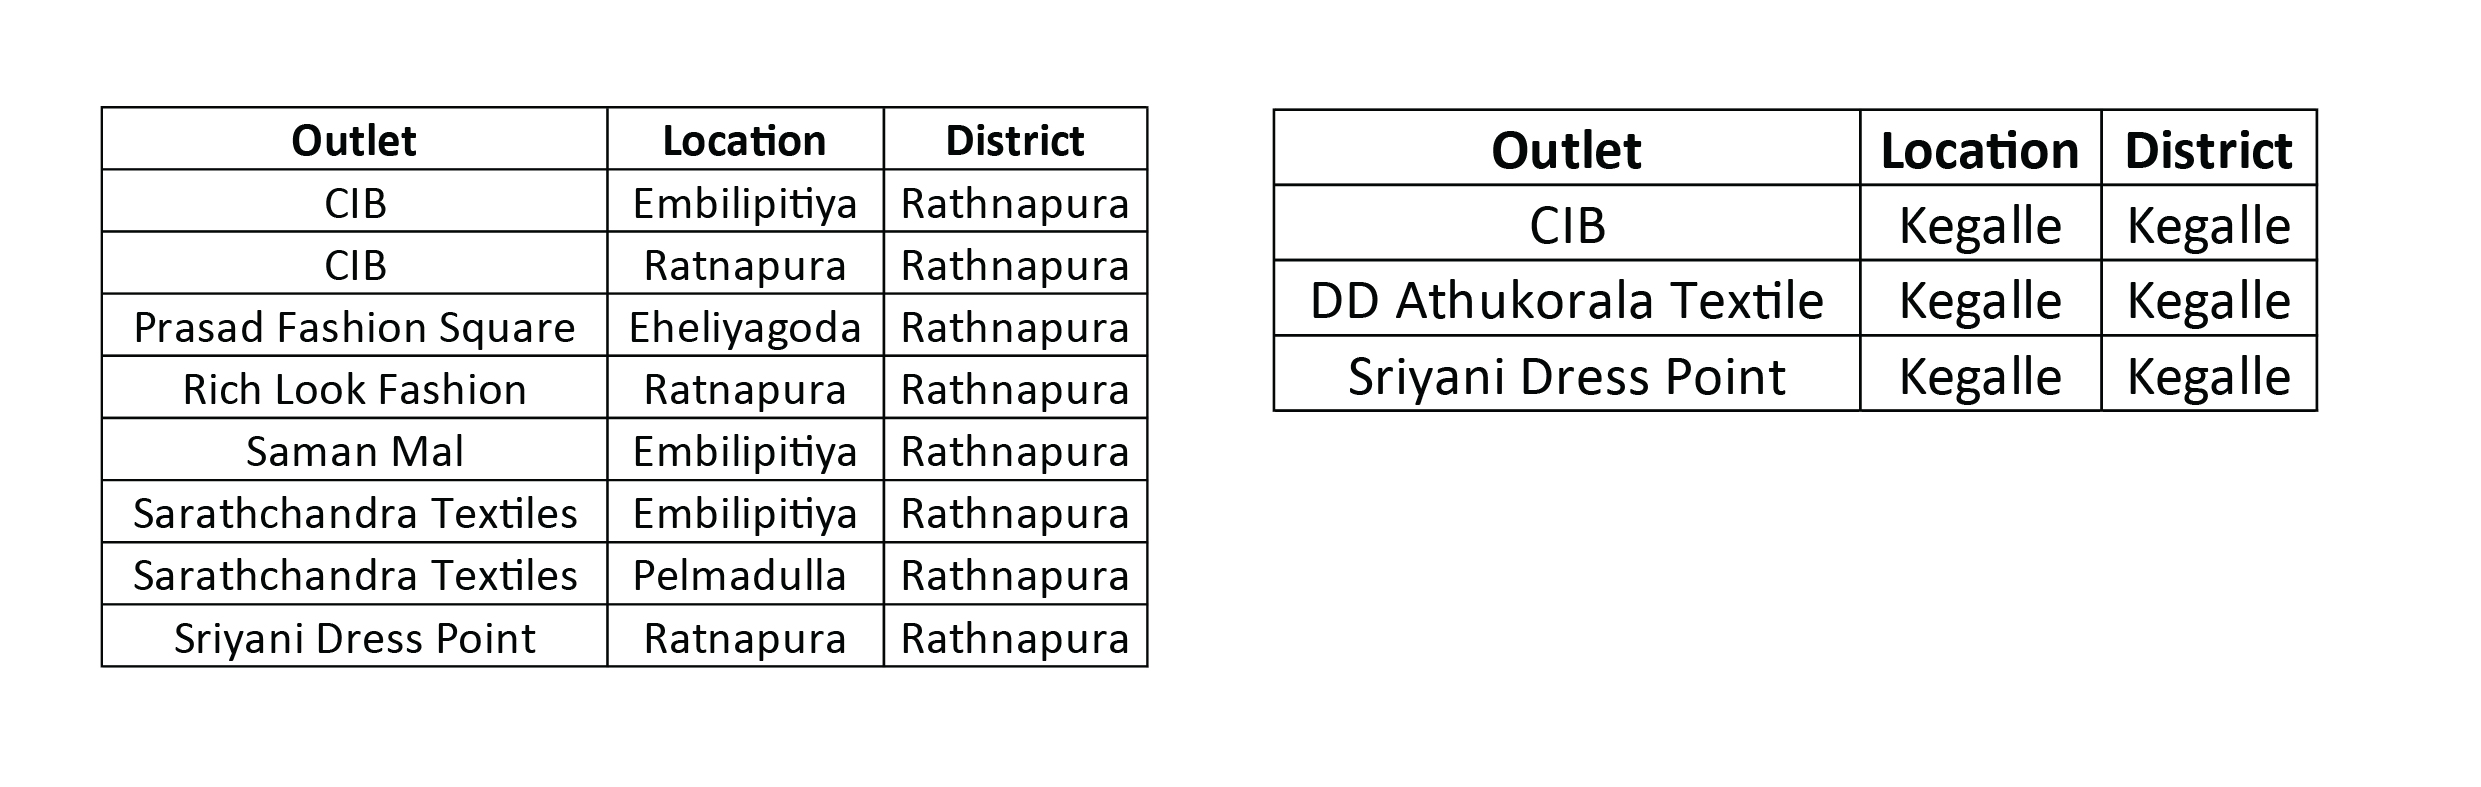 Outlets Locations 03 